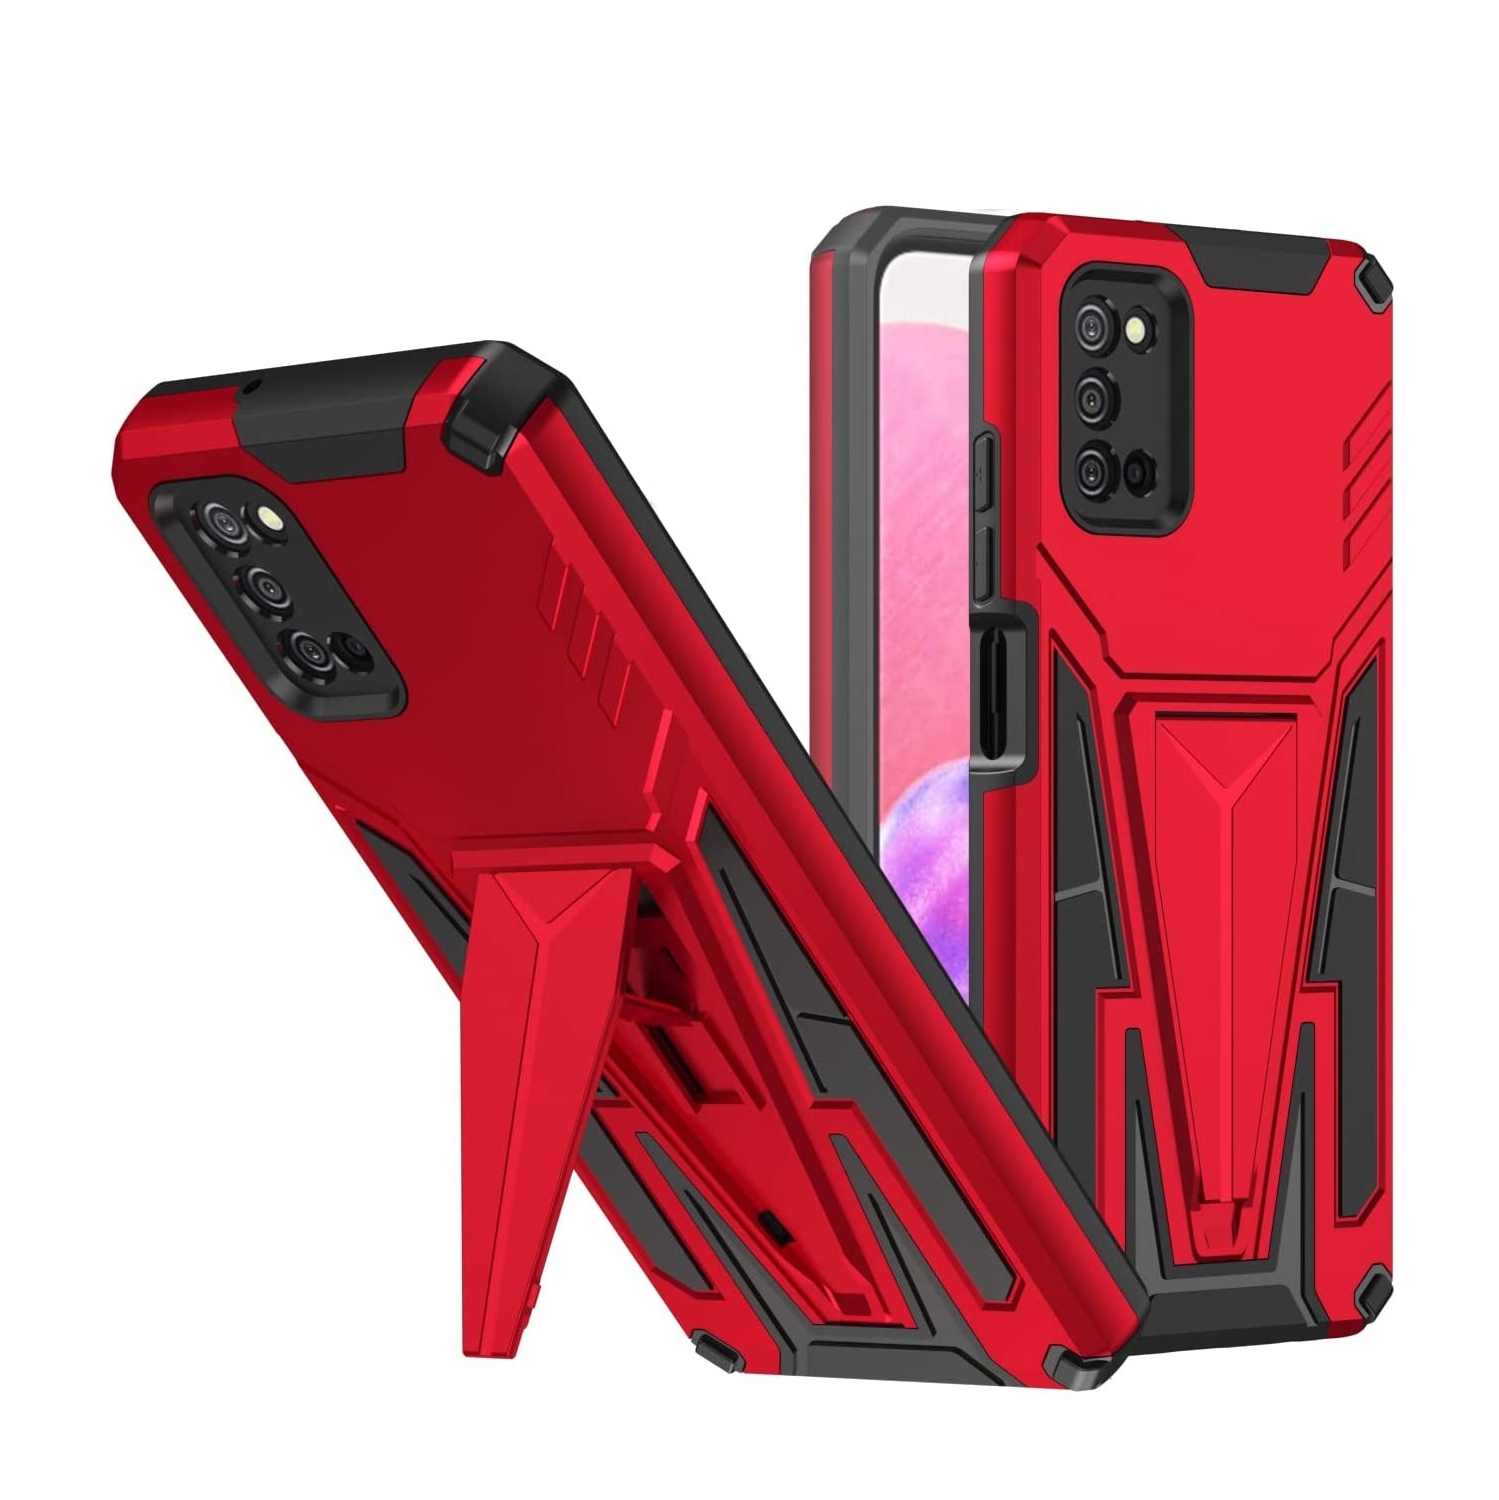 【CSmart】 Shockproof Heavy Duty Rugged Defender Hard Case Kickstand Cover for Samsung Galaxy A52 5G, Red